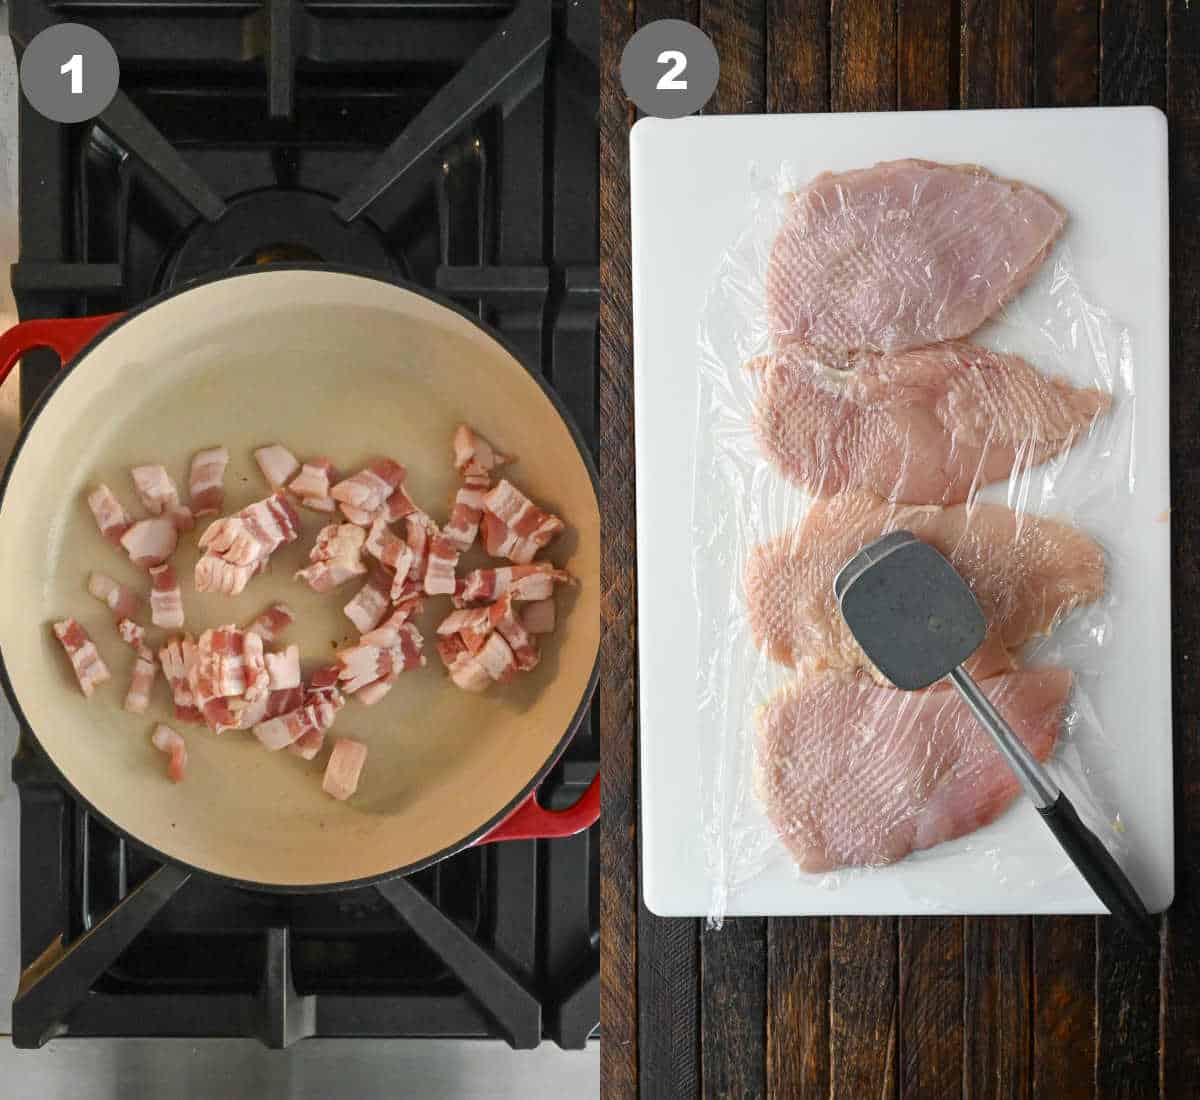 Bacon cooked in a skillet and chicken breasts pounded out on a cutting board.